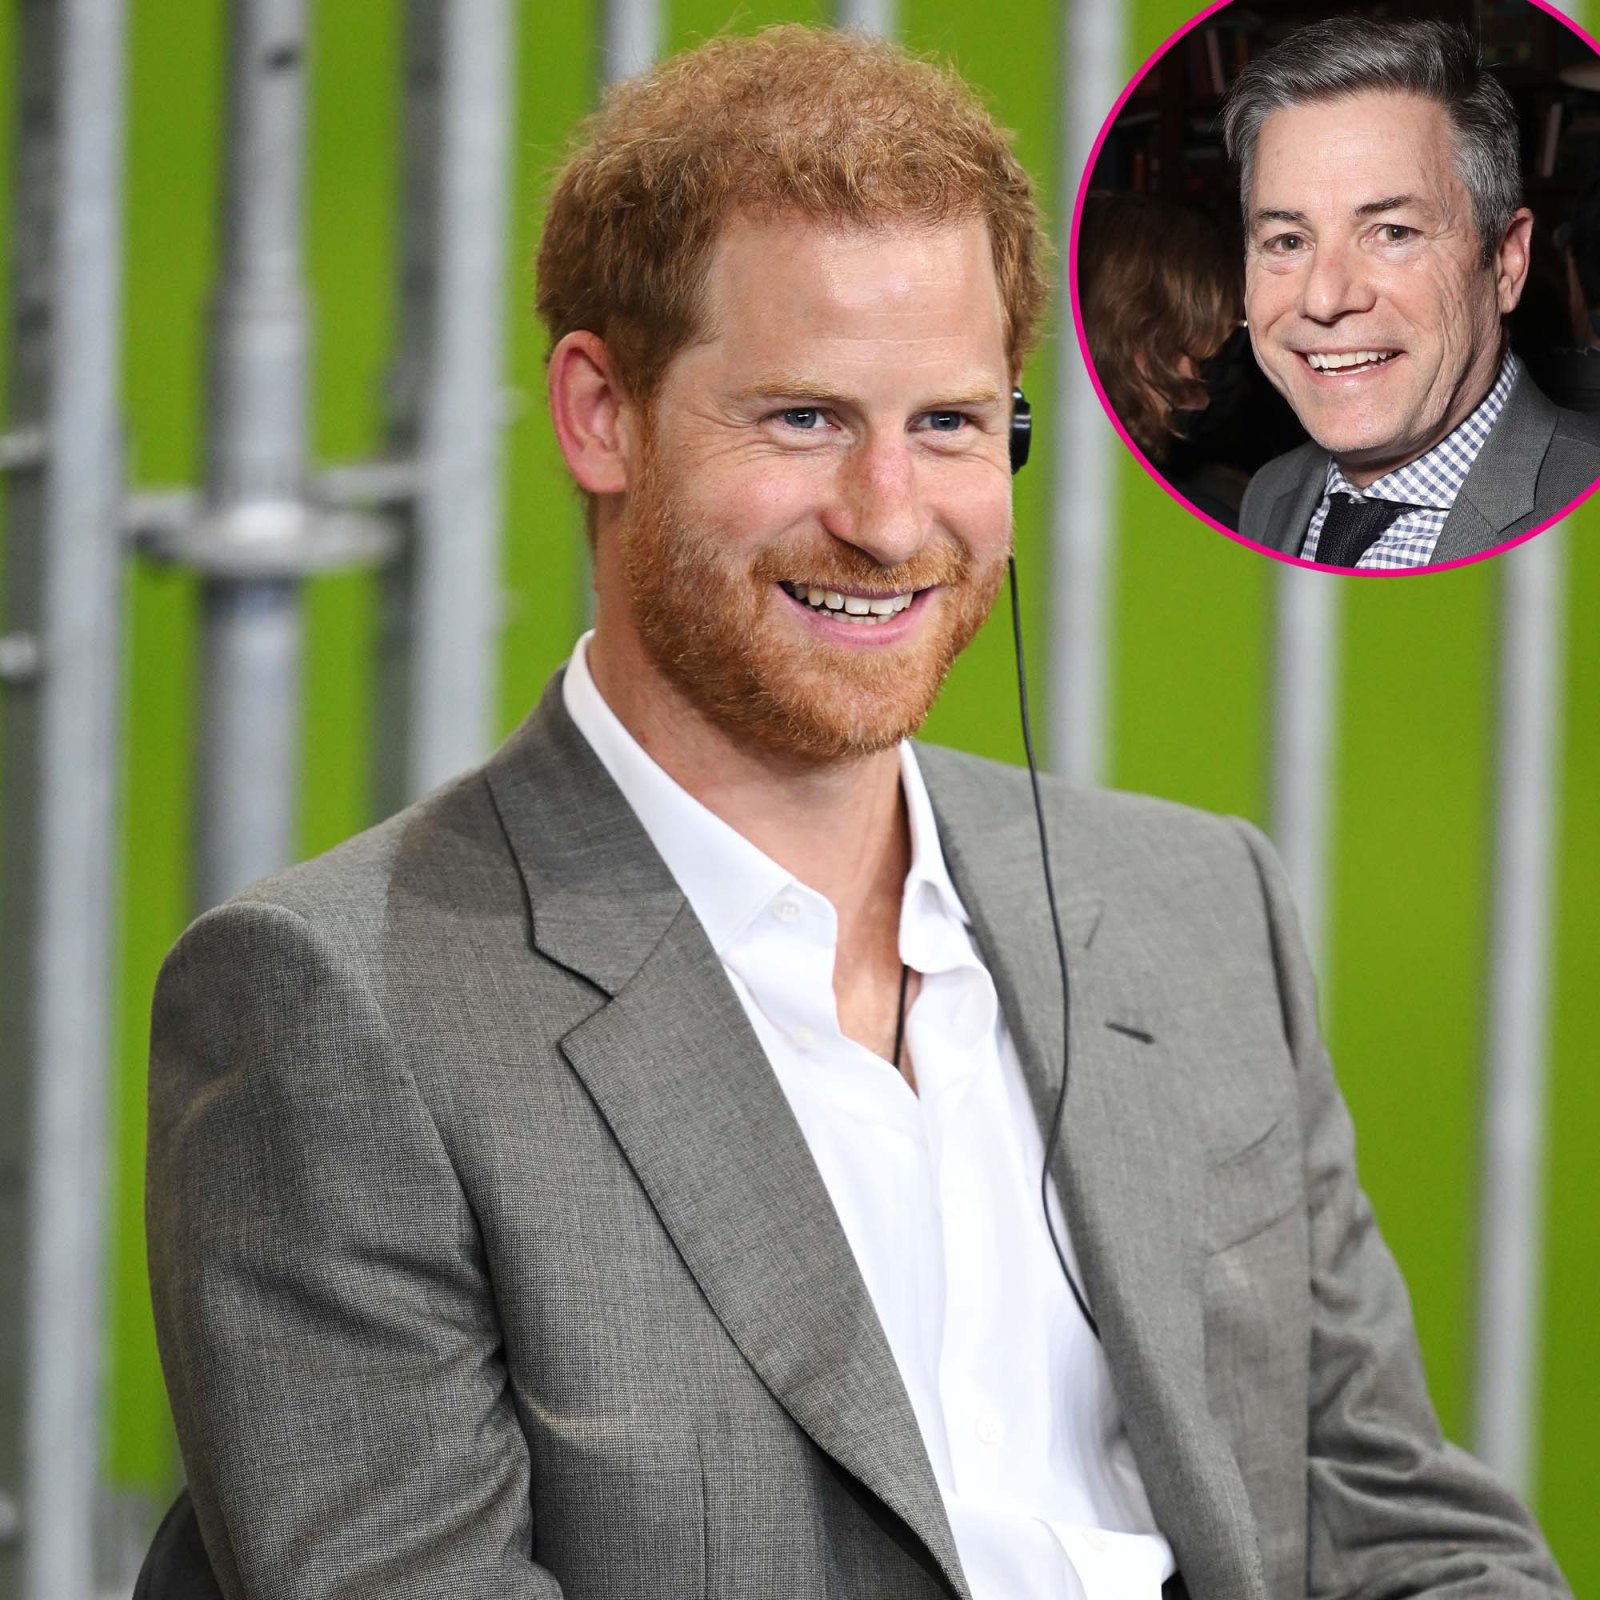 Who Is J.R. Moehringer? 5 Things to Know About Prince Harry's 'Spare' Memoir Ghostwriter